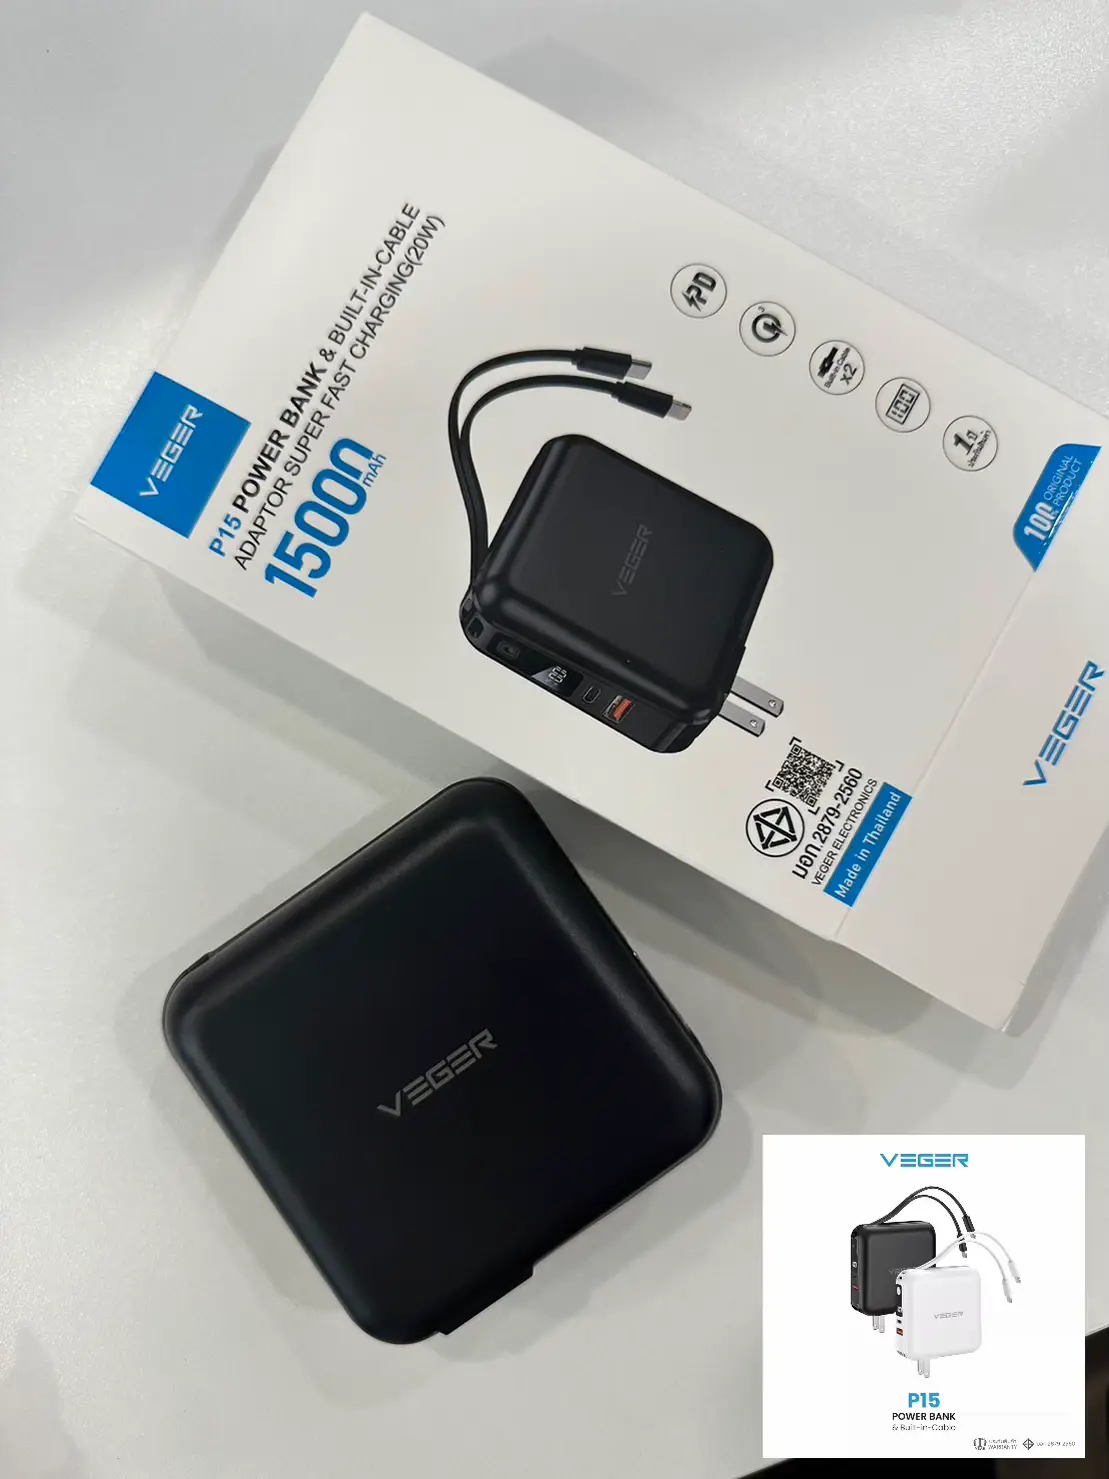 Veger P15 Power Bank Built-in Cables/ Adaptor Super Fast Charging (20W)  15000mAh (W1501)